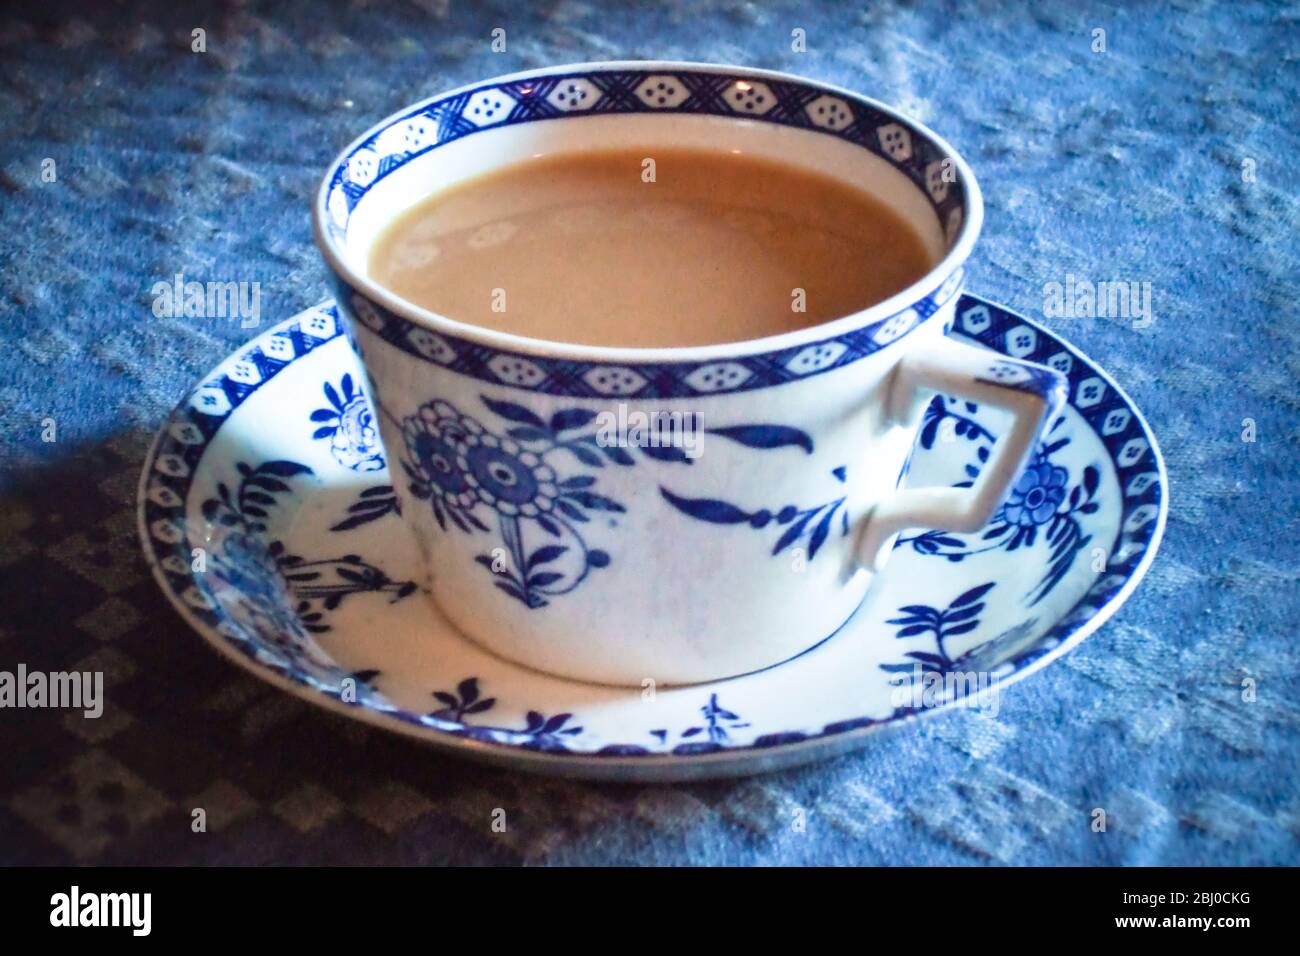 Antique blue and white cup and saucer of Indian tea with milk, on blue tablecloth - Stock Photo